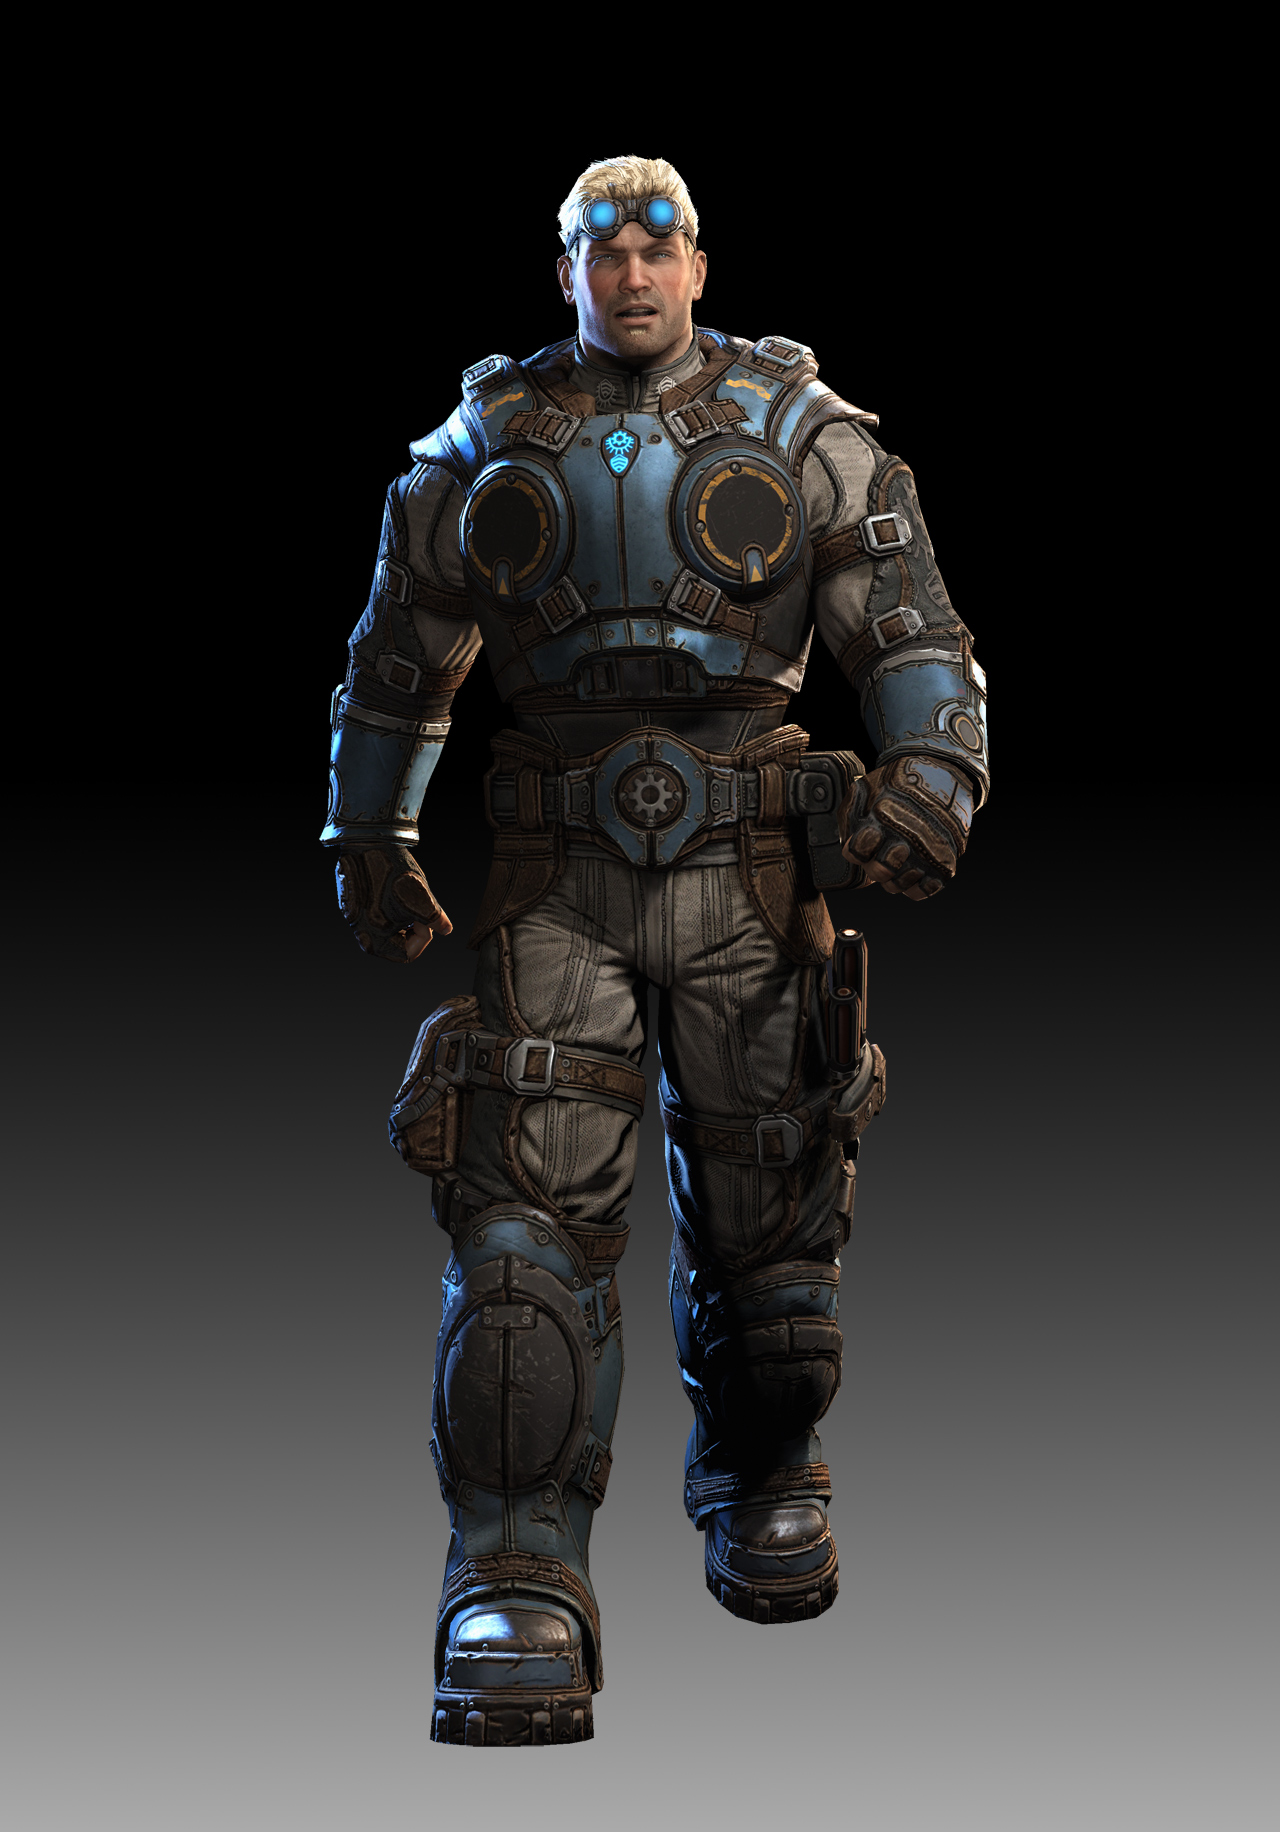 Gears Of War: Judgment Backgrounds, Compatible - PC, Mobile, Gadgets| 1280x1832 px